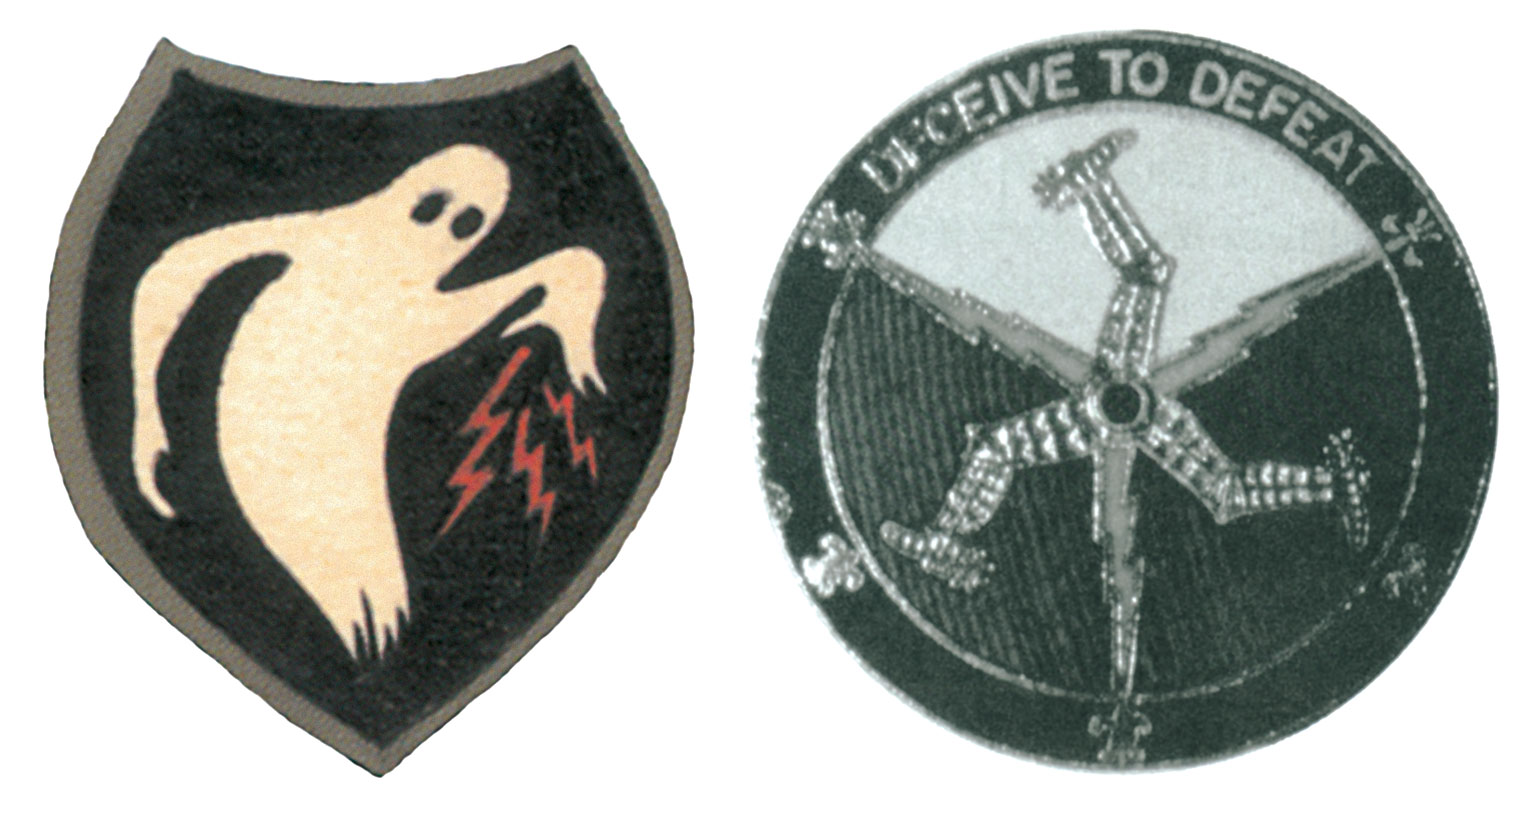 Two unauthorized insignias designed by men of the 23rd Special Troops.